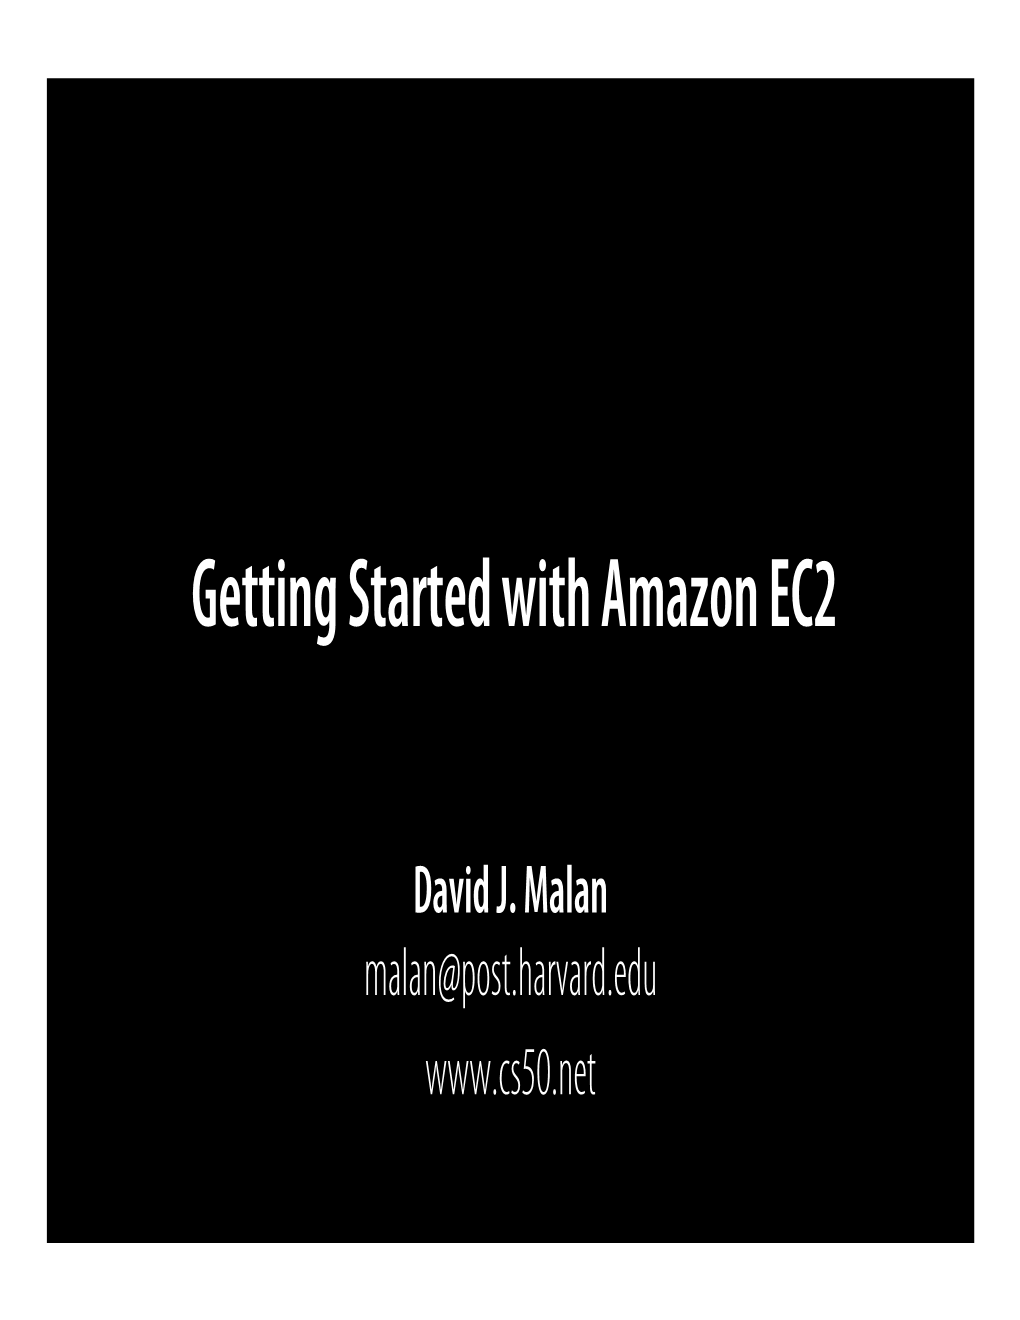 Getting Started with Amazon EC2